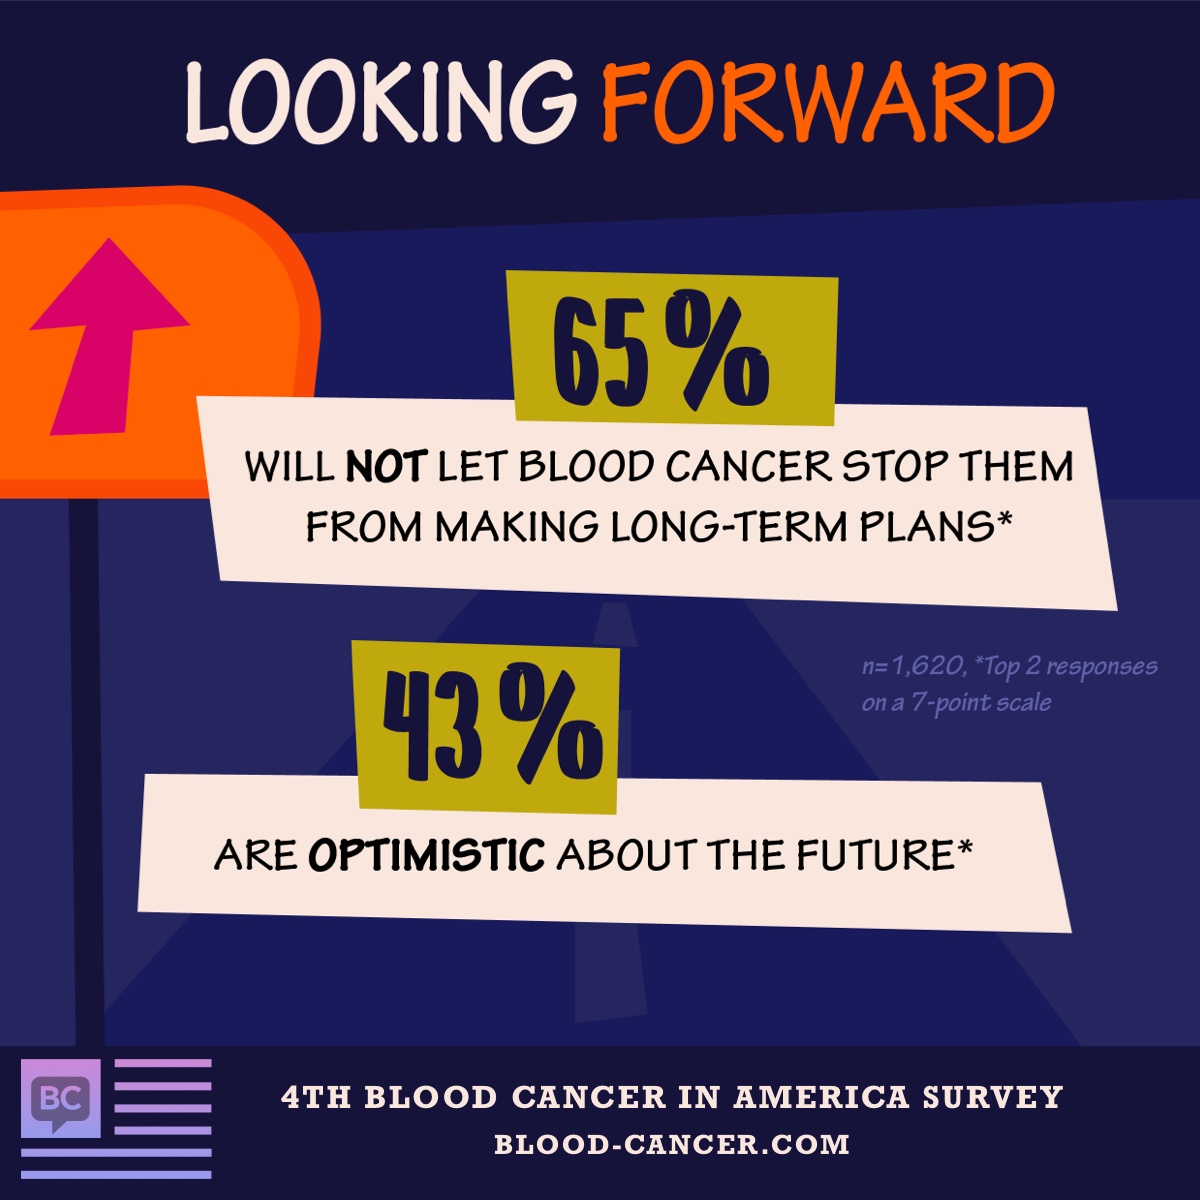 65% of people are not going to let blood cancer stop them from making long term plans and 43% are optimistic about the future.